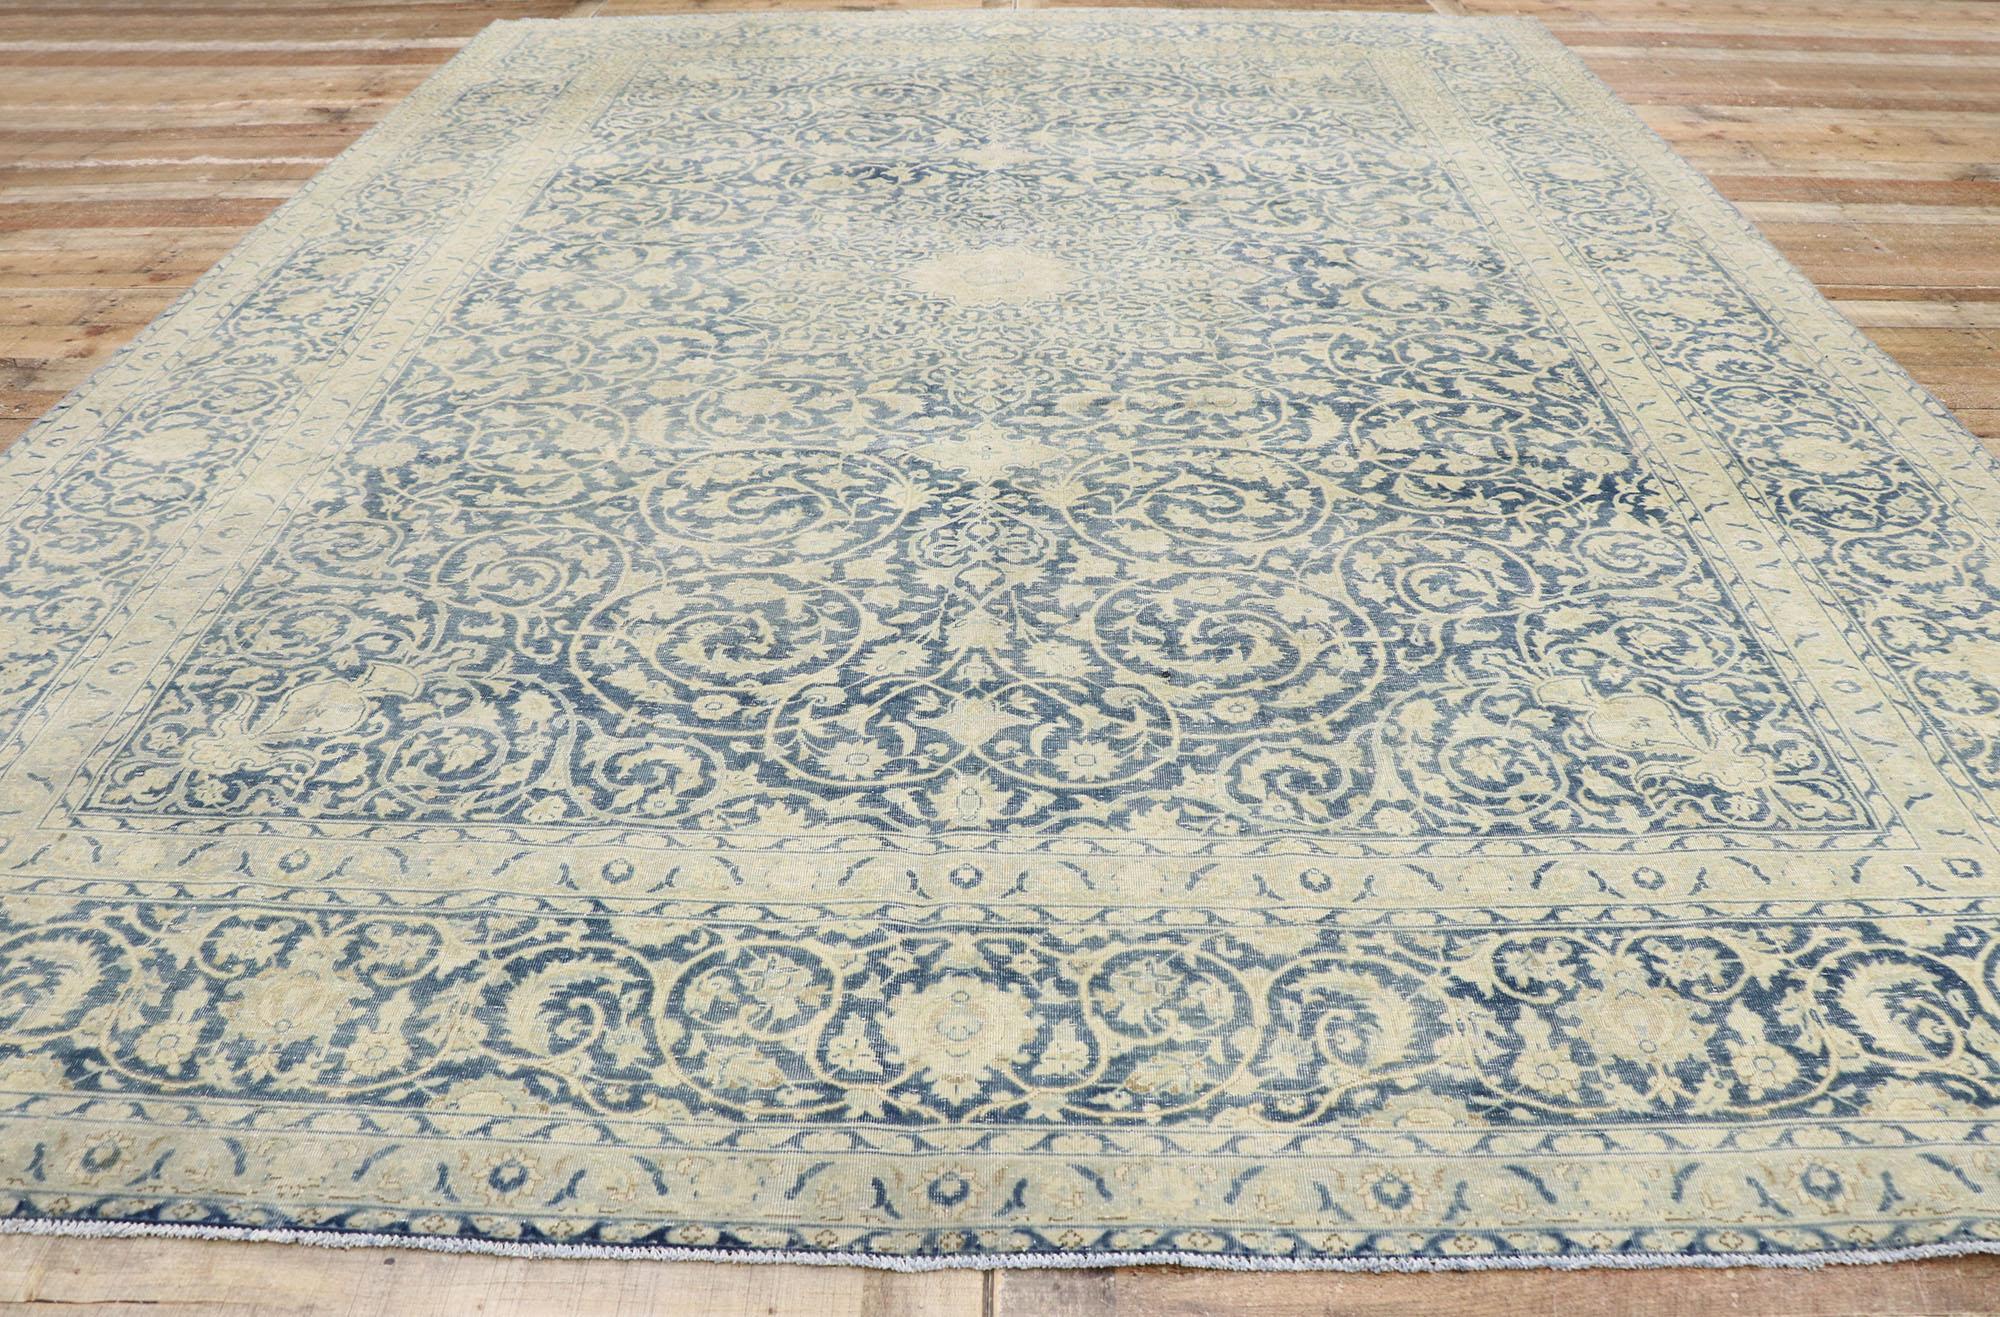 Distressed Antique Persian Tabriz Rug with Rustic Greek Mediterranean Style For Sale 1